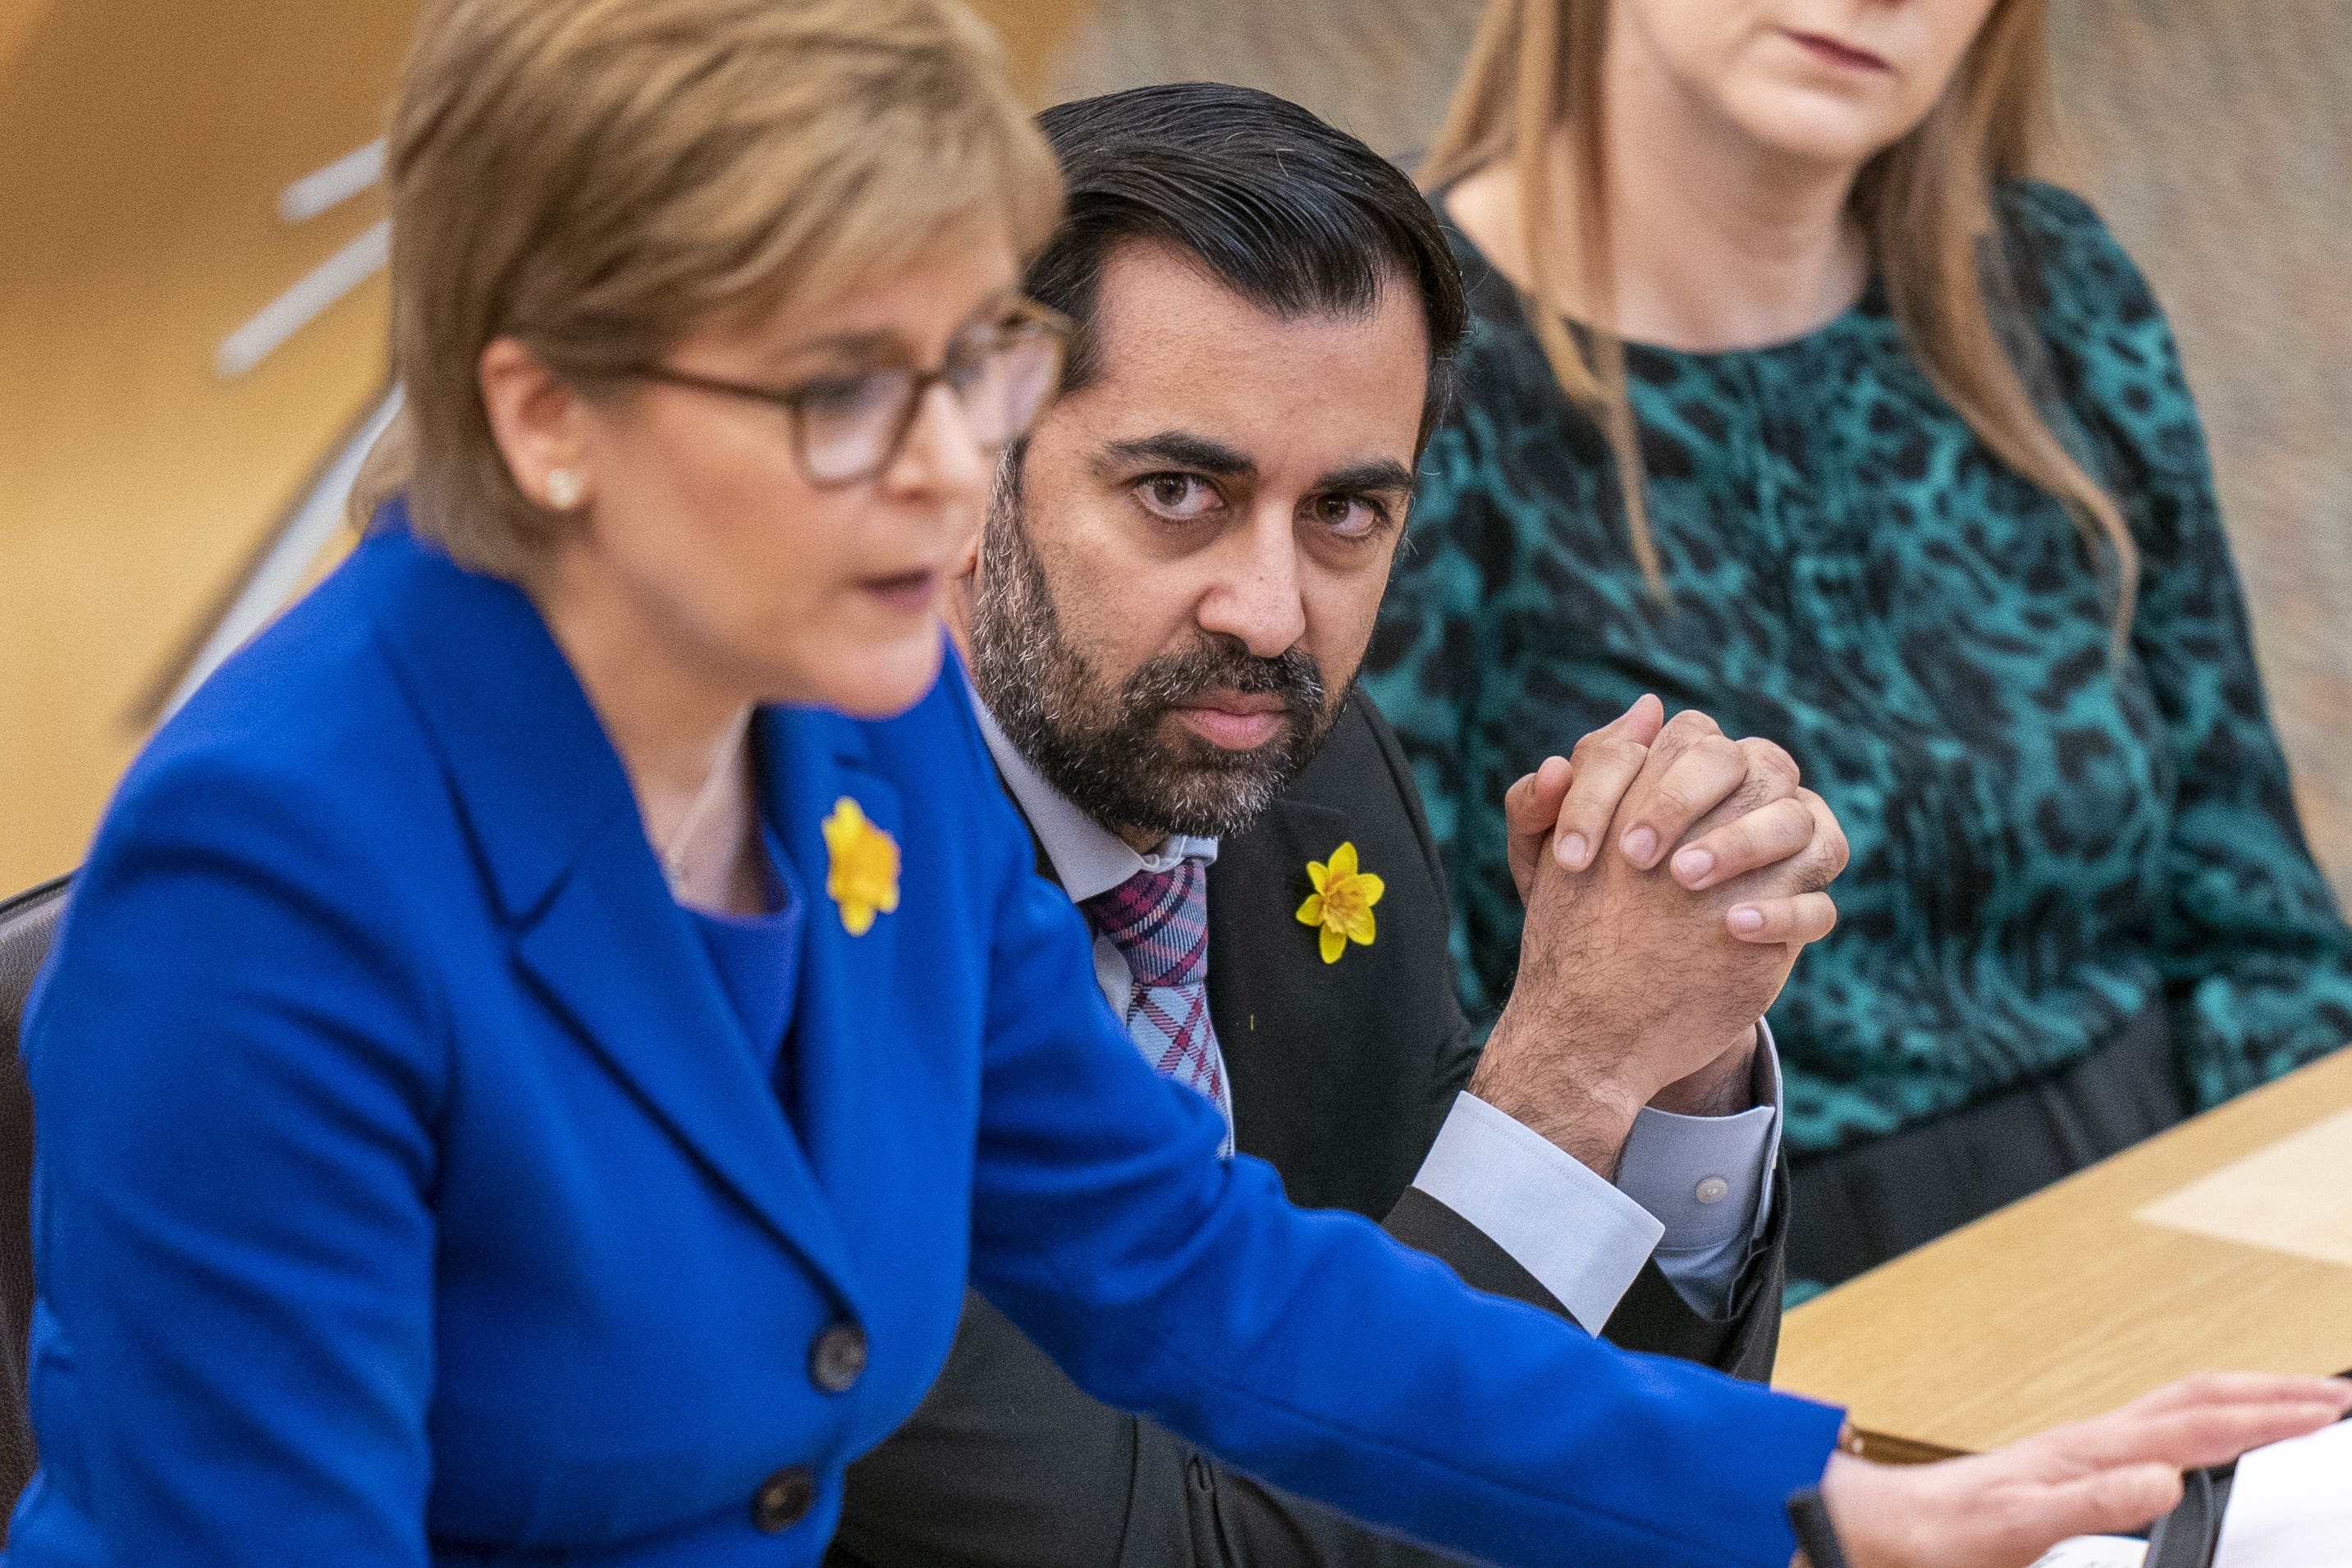 Humza Yousaf said he hopes to rely on the guidance of his predecessor Nicola Sturgeon